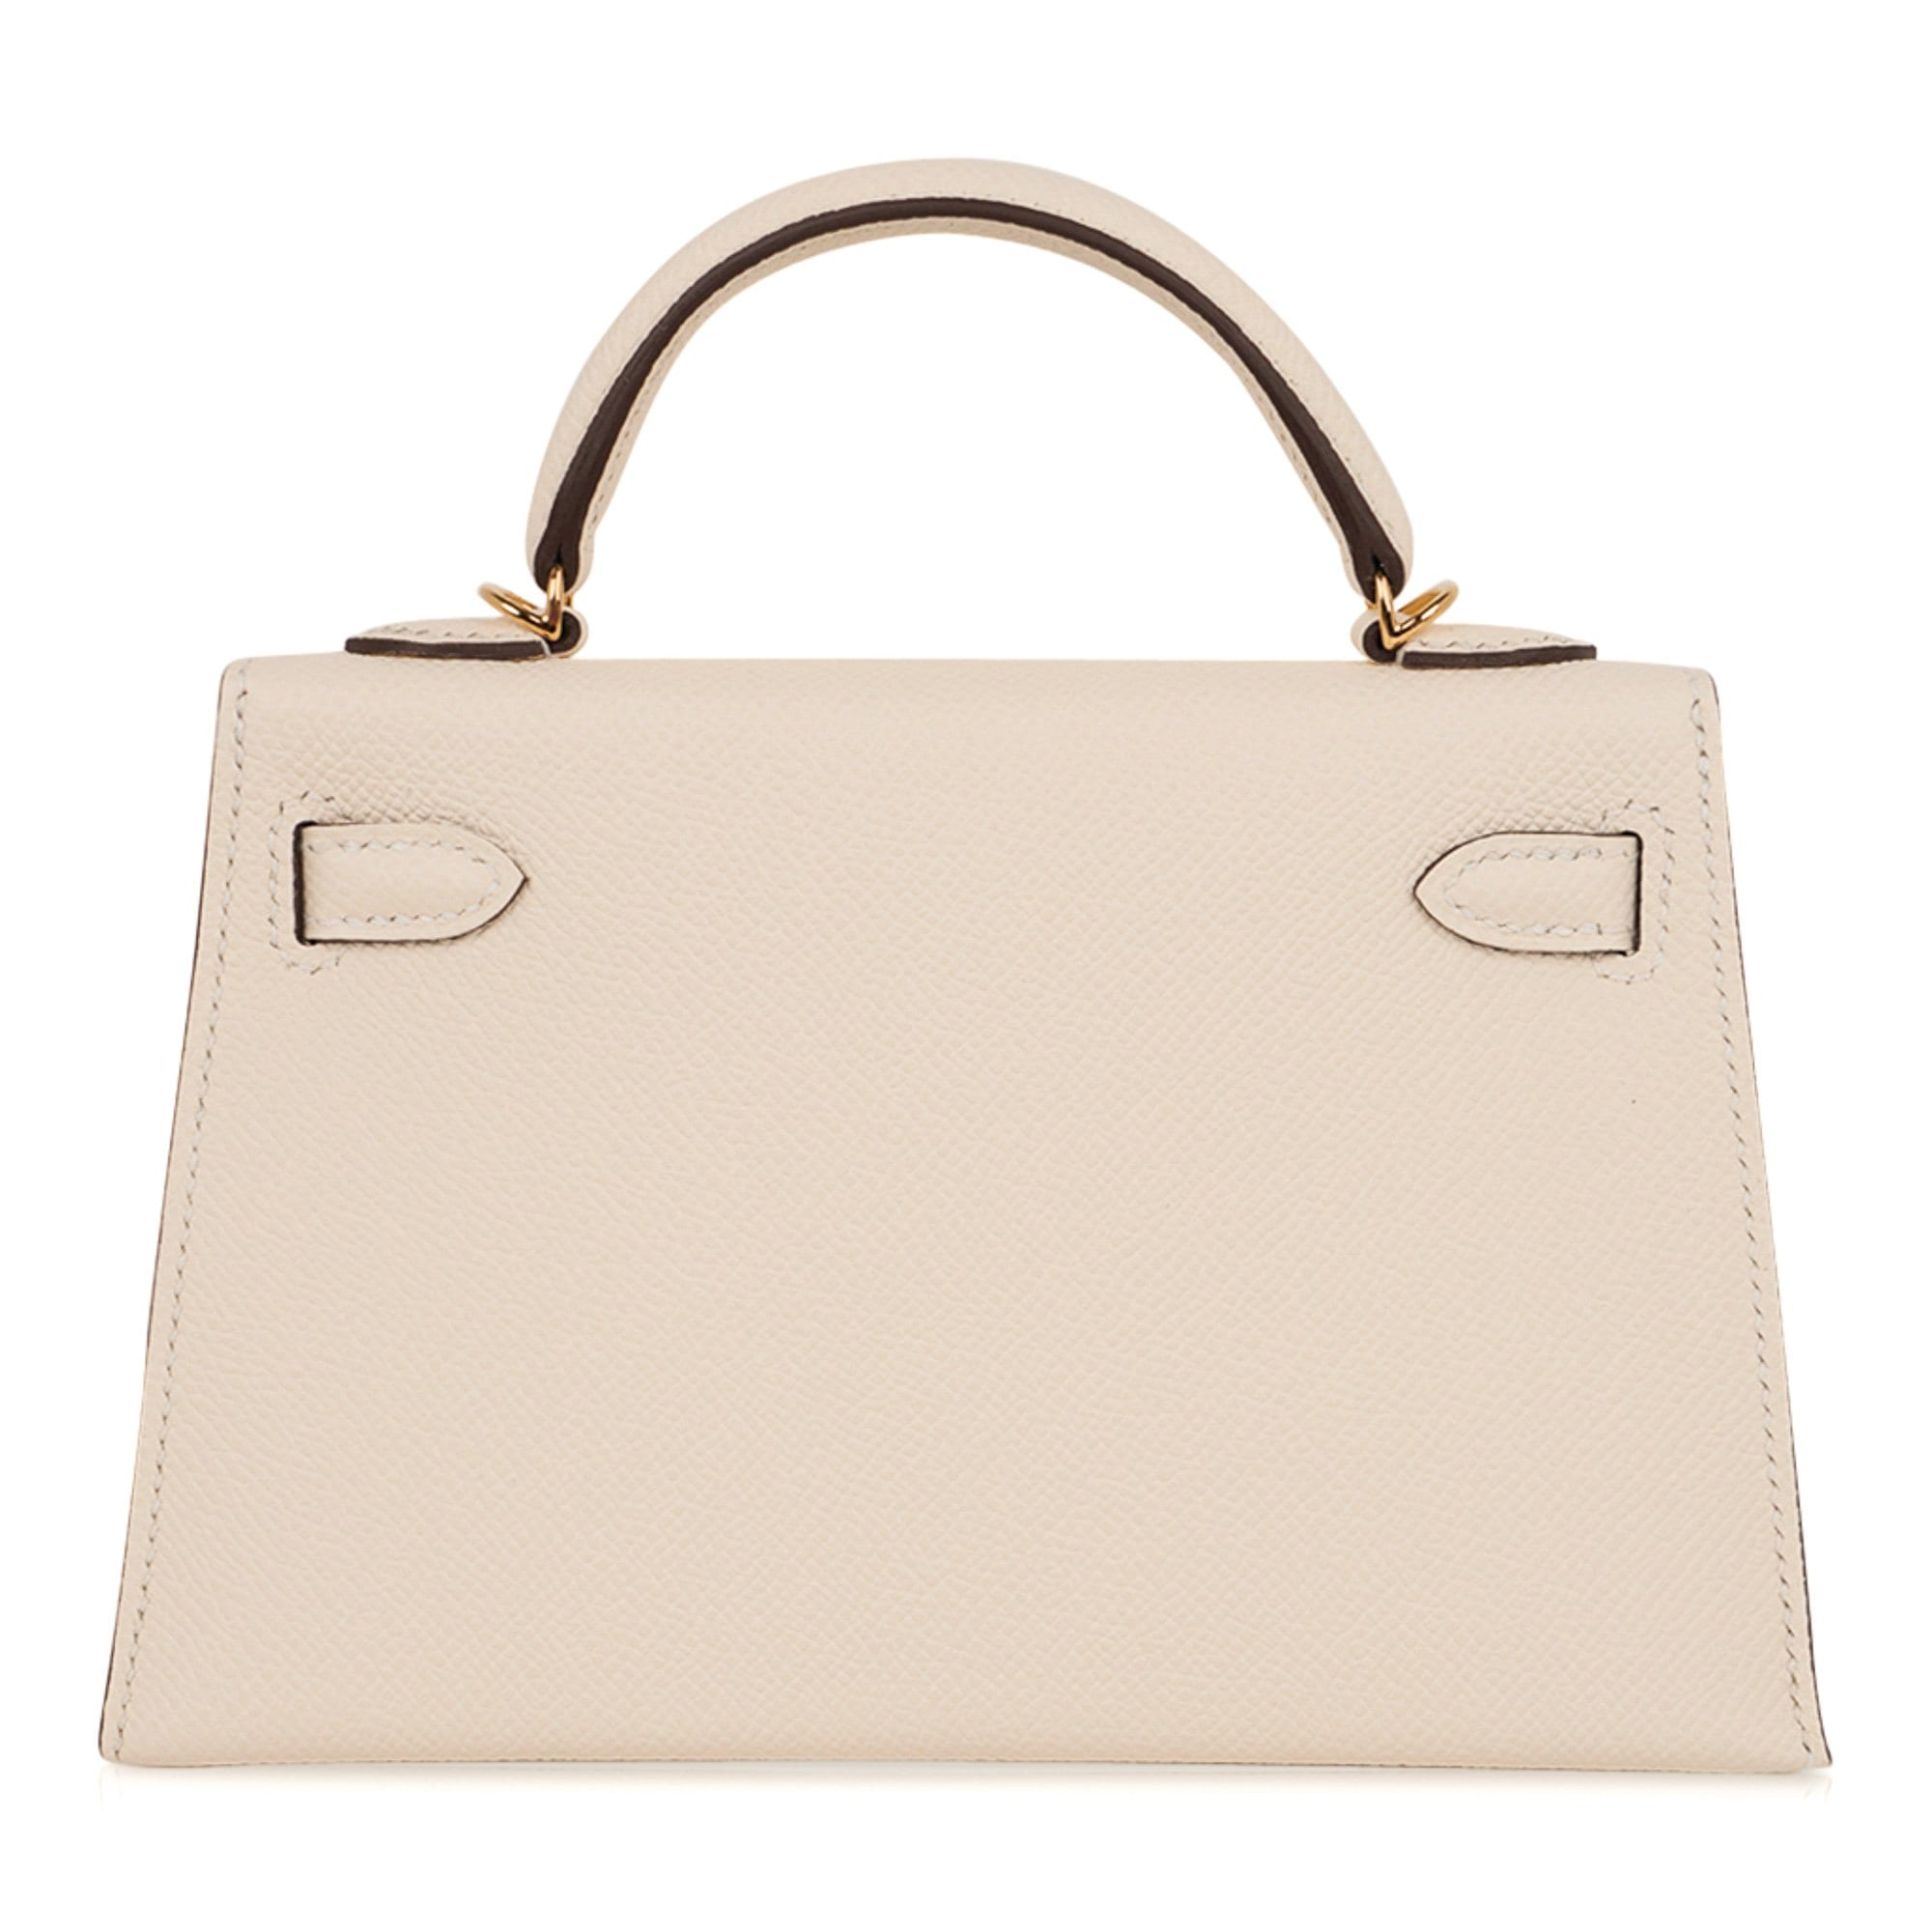 Hermes Mini Kelly 20 Sellier Bag in Nata Epsom Leather with Gold Hardw ...